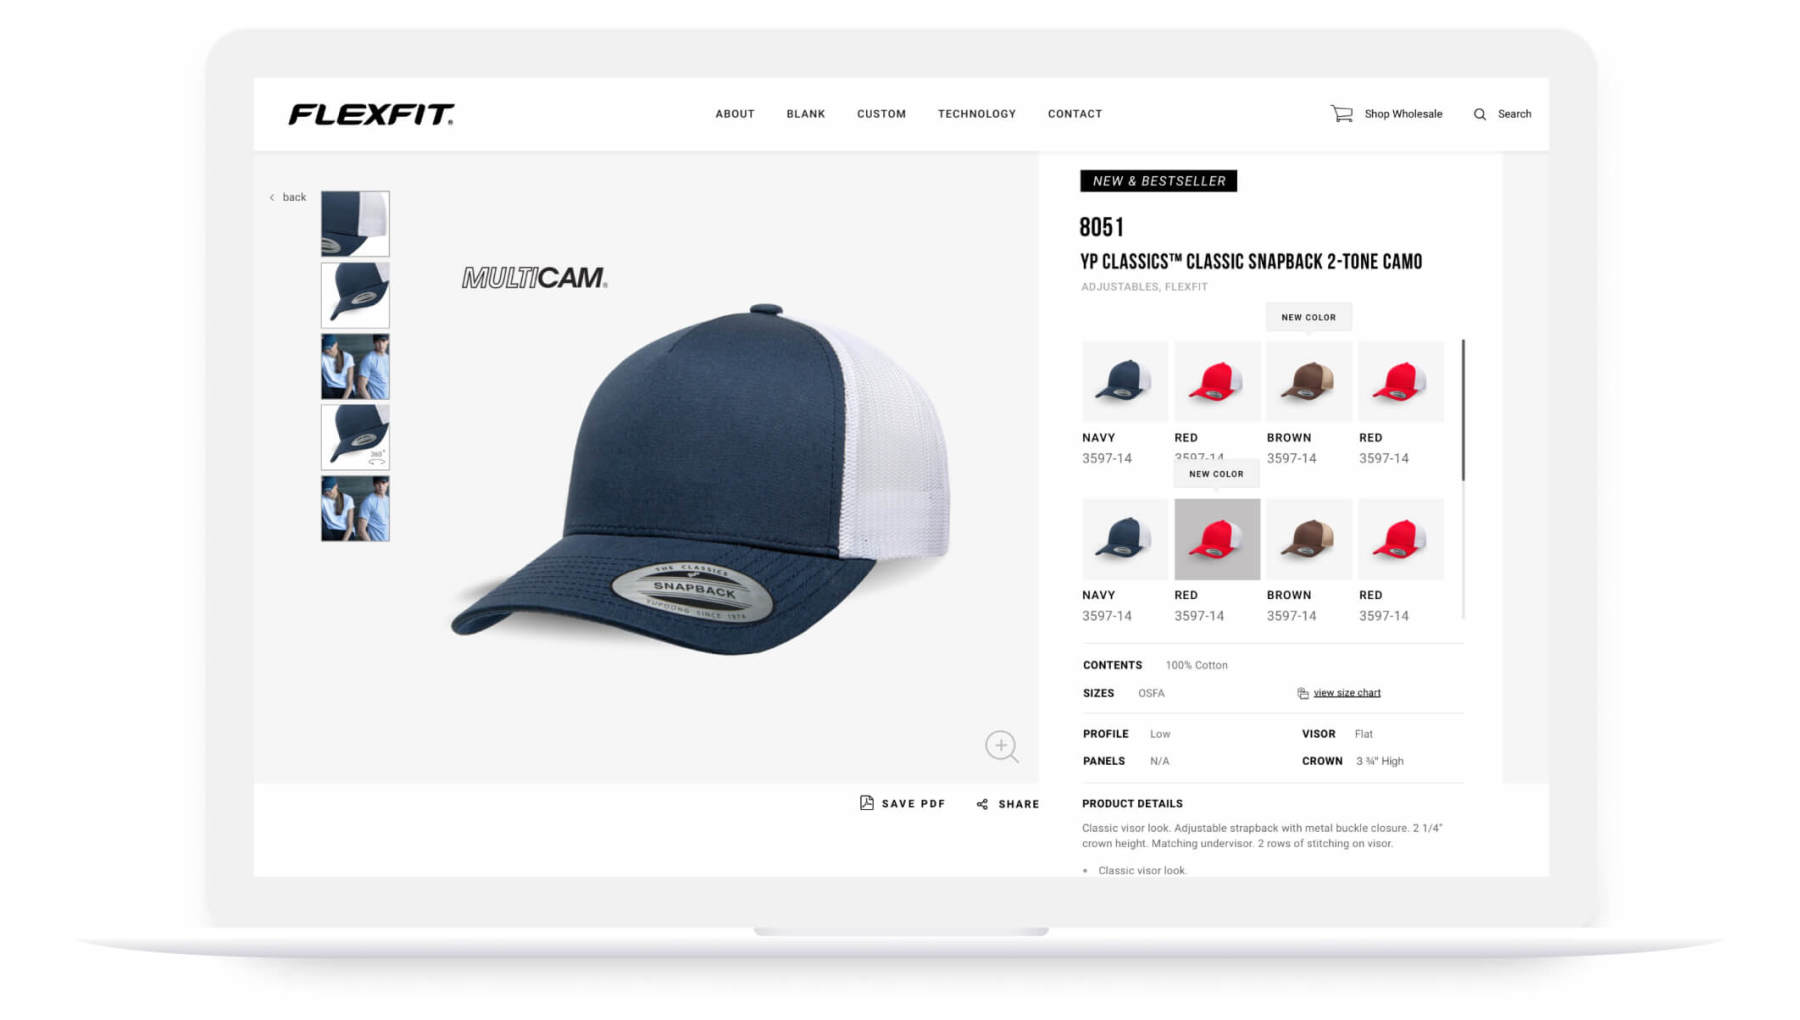 flexfit website classic snapback product page on laptop screen